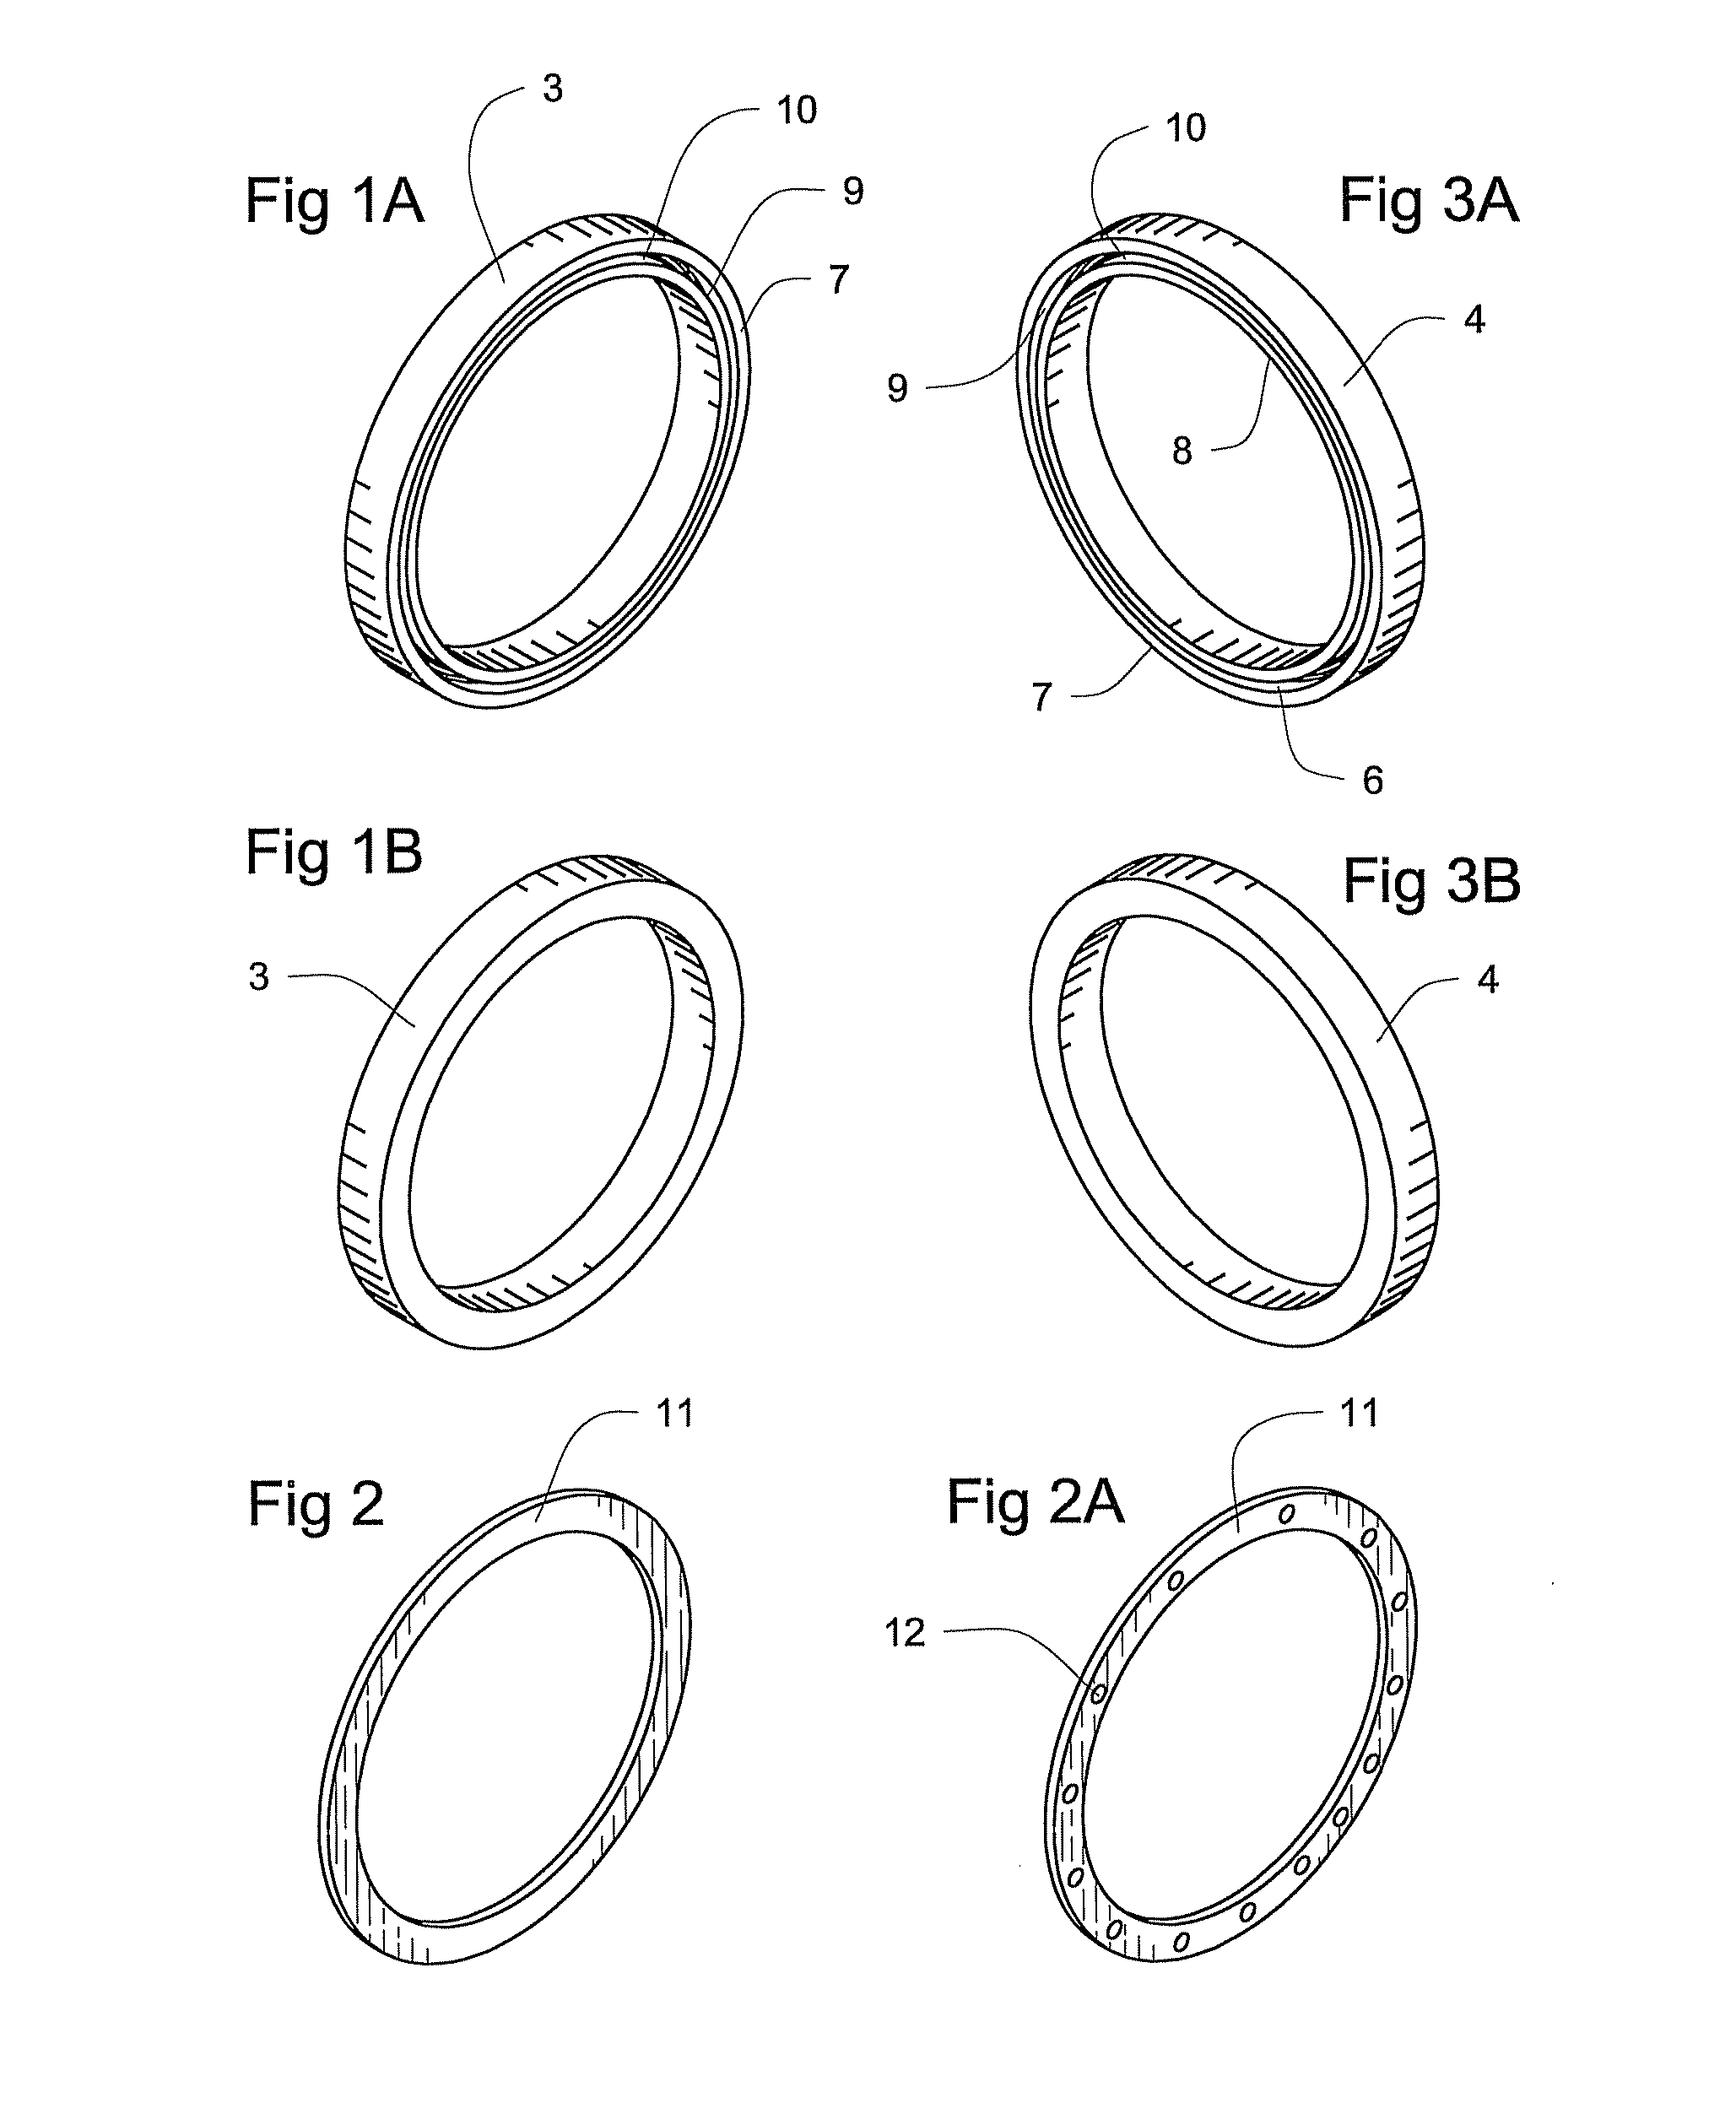 Jewelry Item Having Reduced Weight and Enhanced Strength